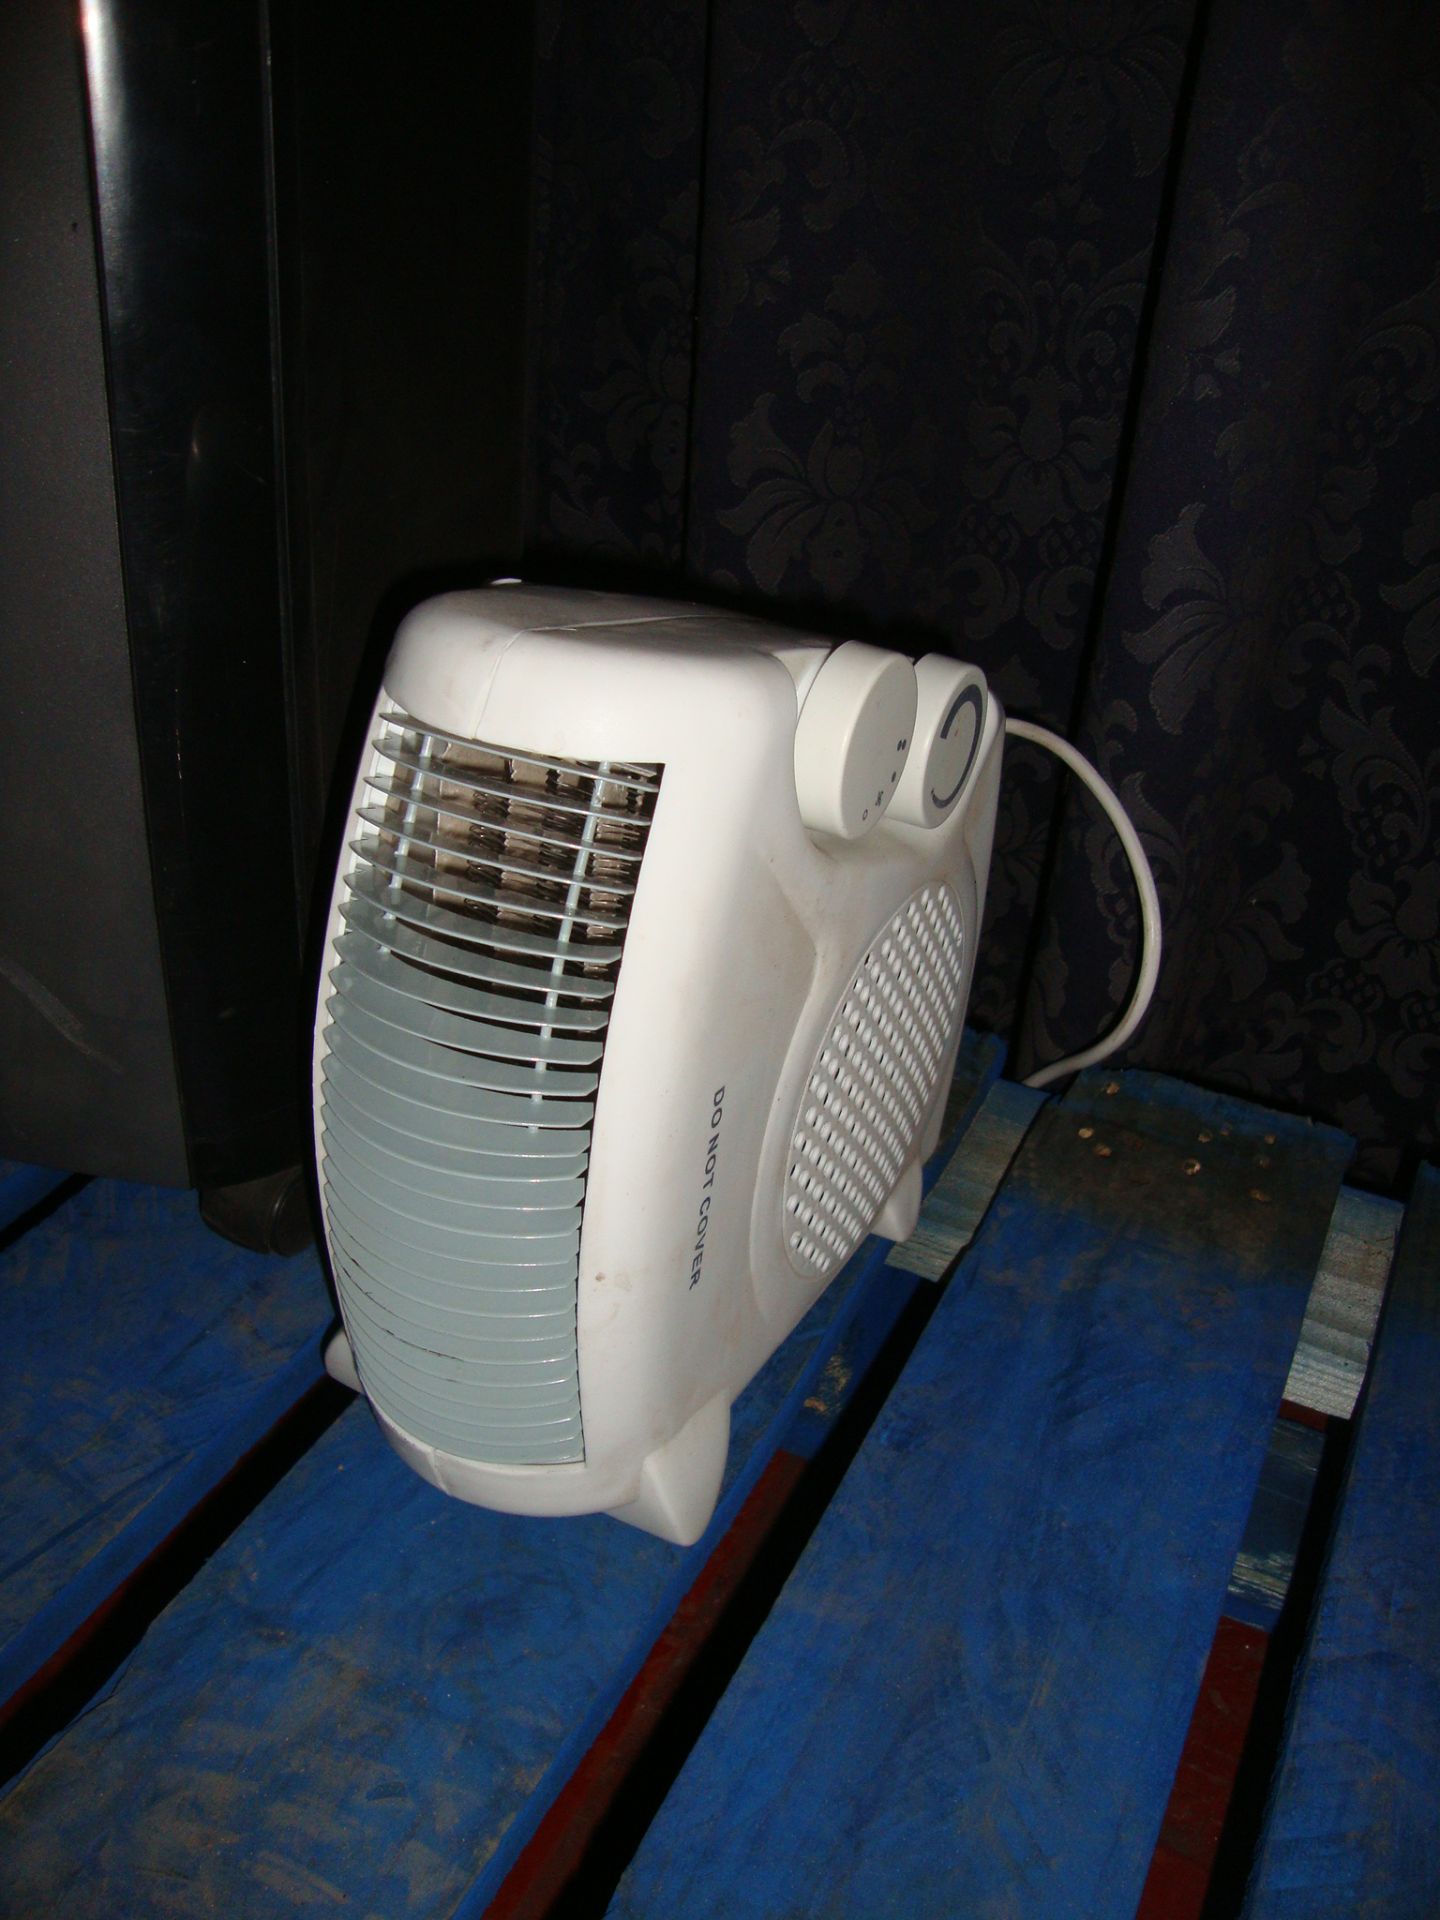 Office equipment comprising Fellowes shredder, Nokia mobile phone and small fan heater - Image 3 of 4